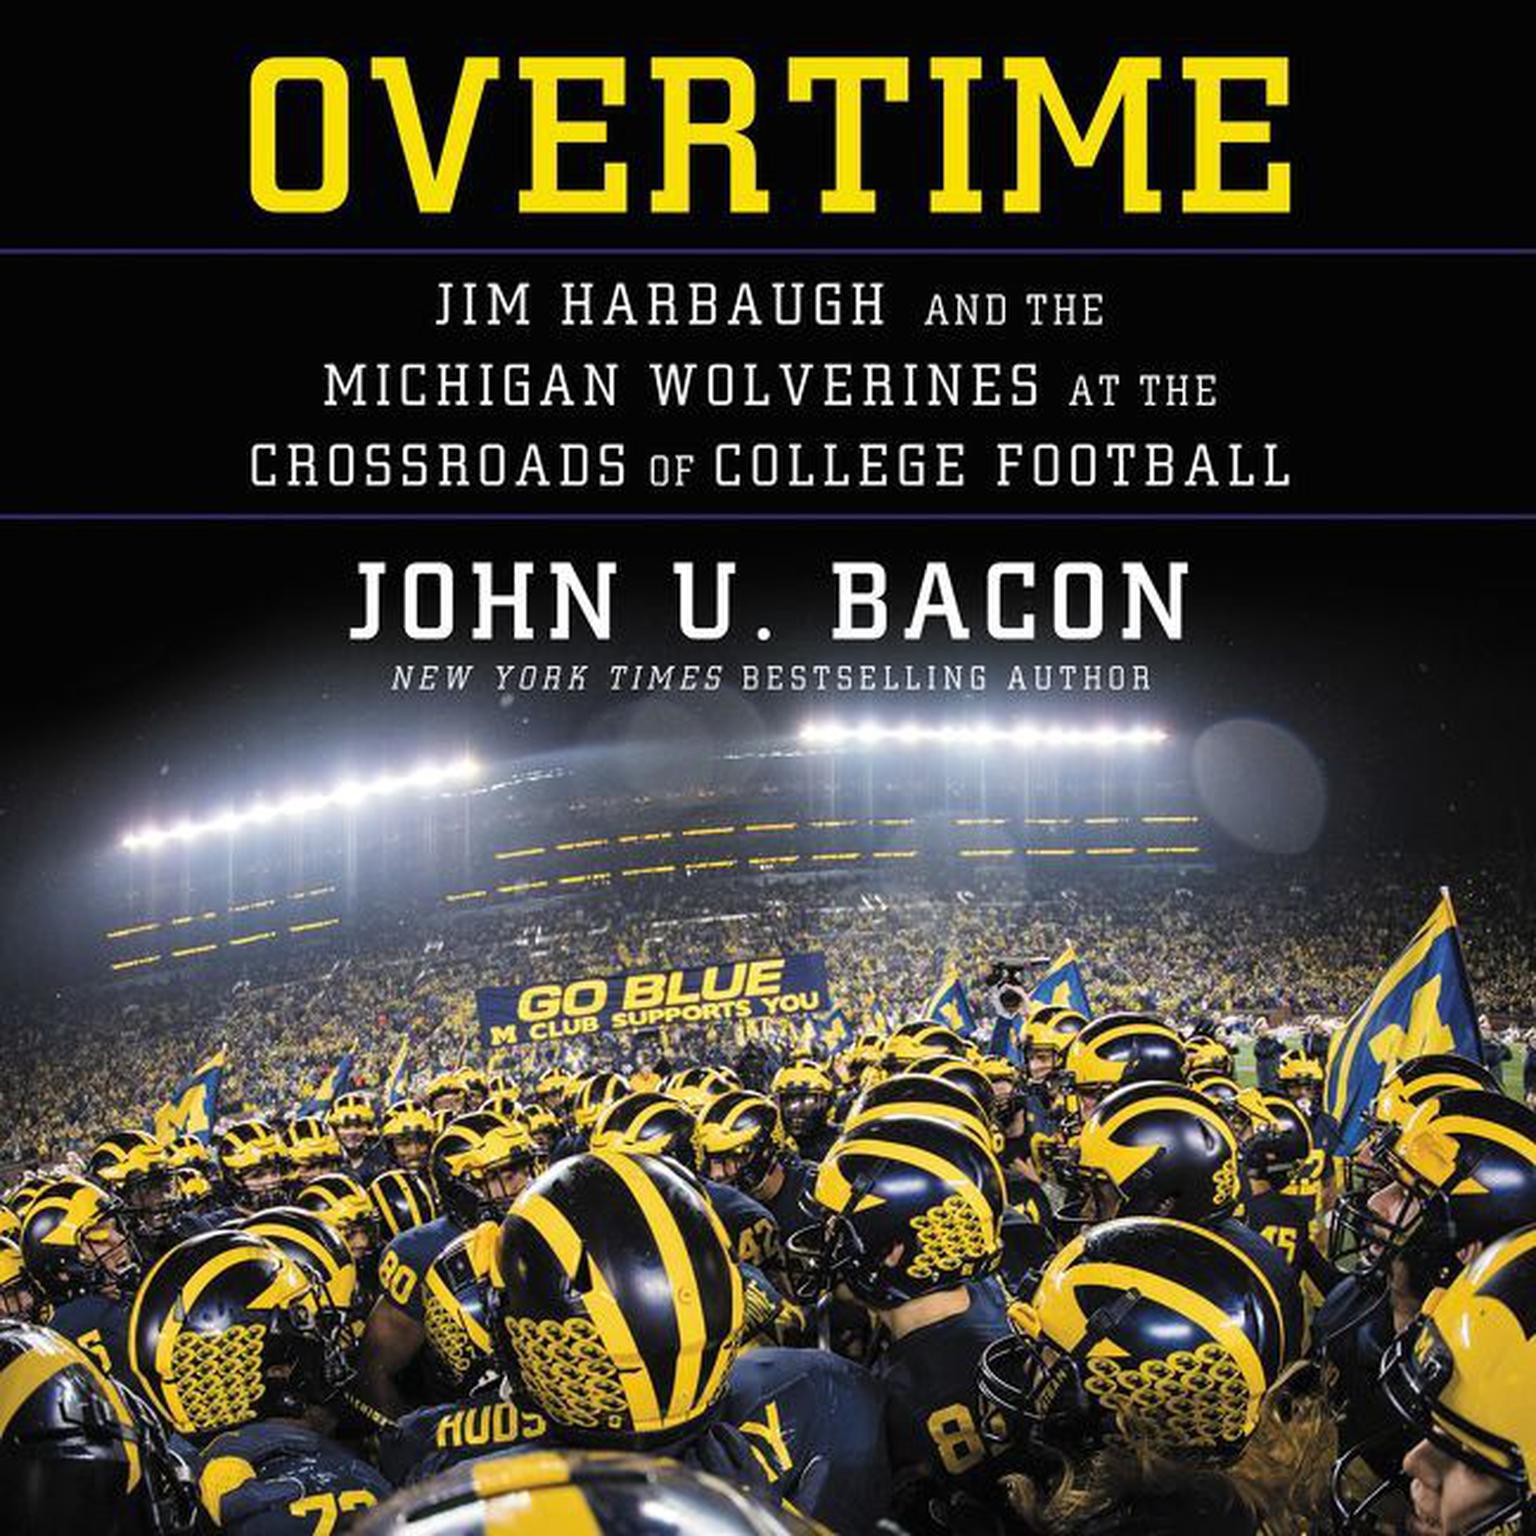 Overtime: Jim Harbaugh and the Michigan Wolverines at the Crossroads of College Football Audiobook, by John U. Bacon